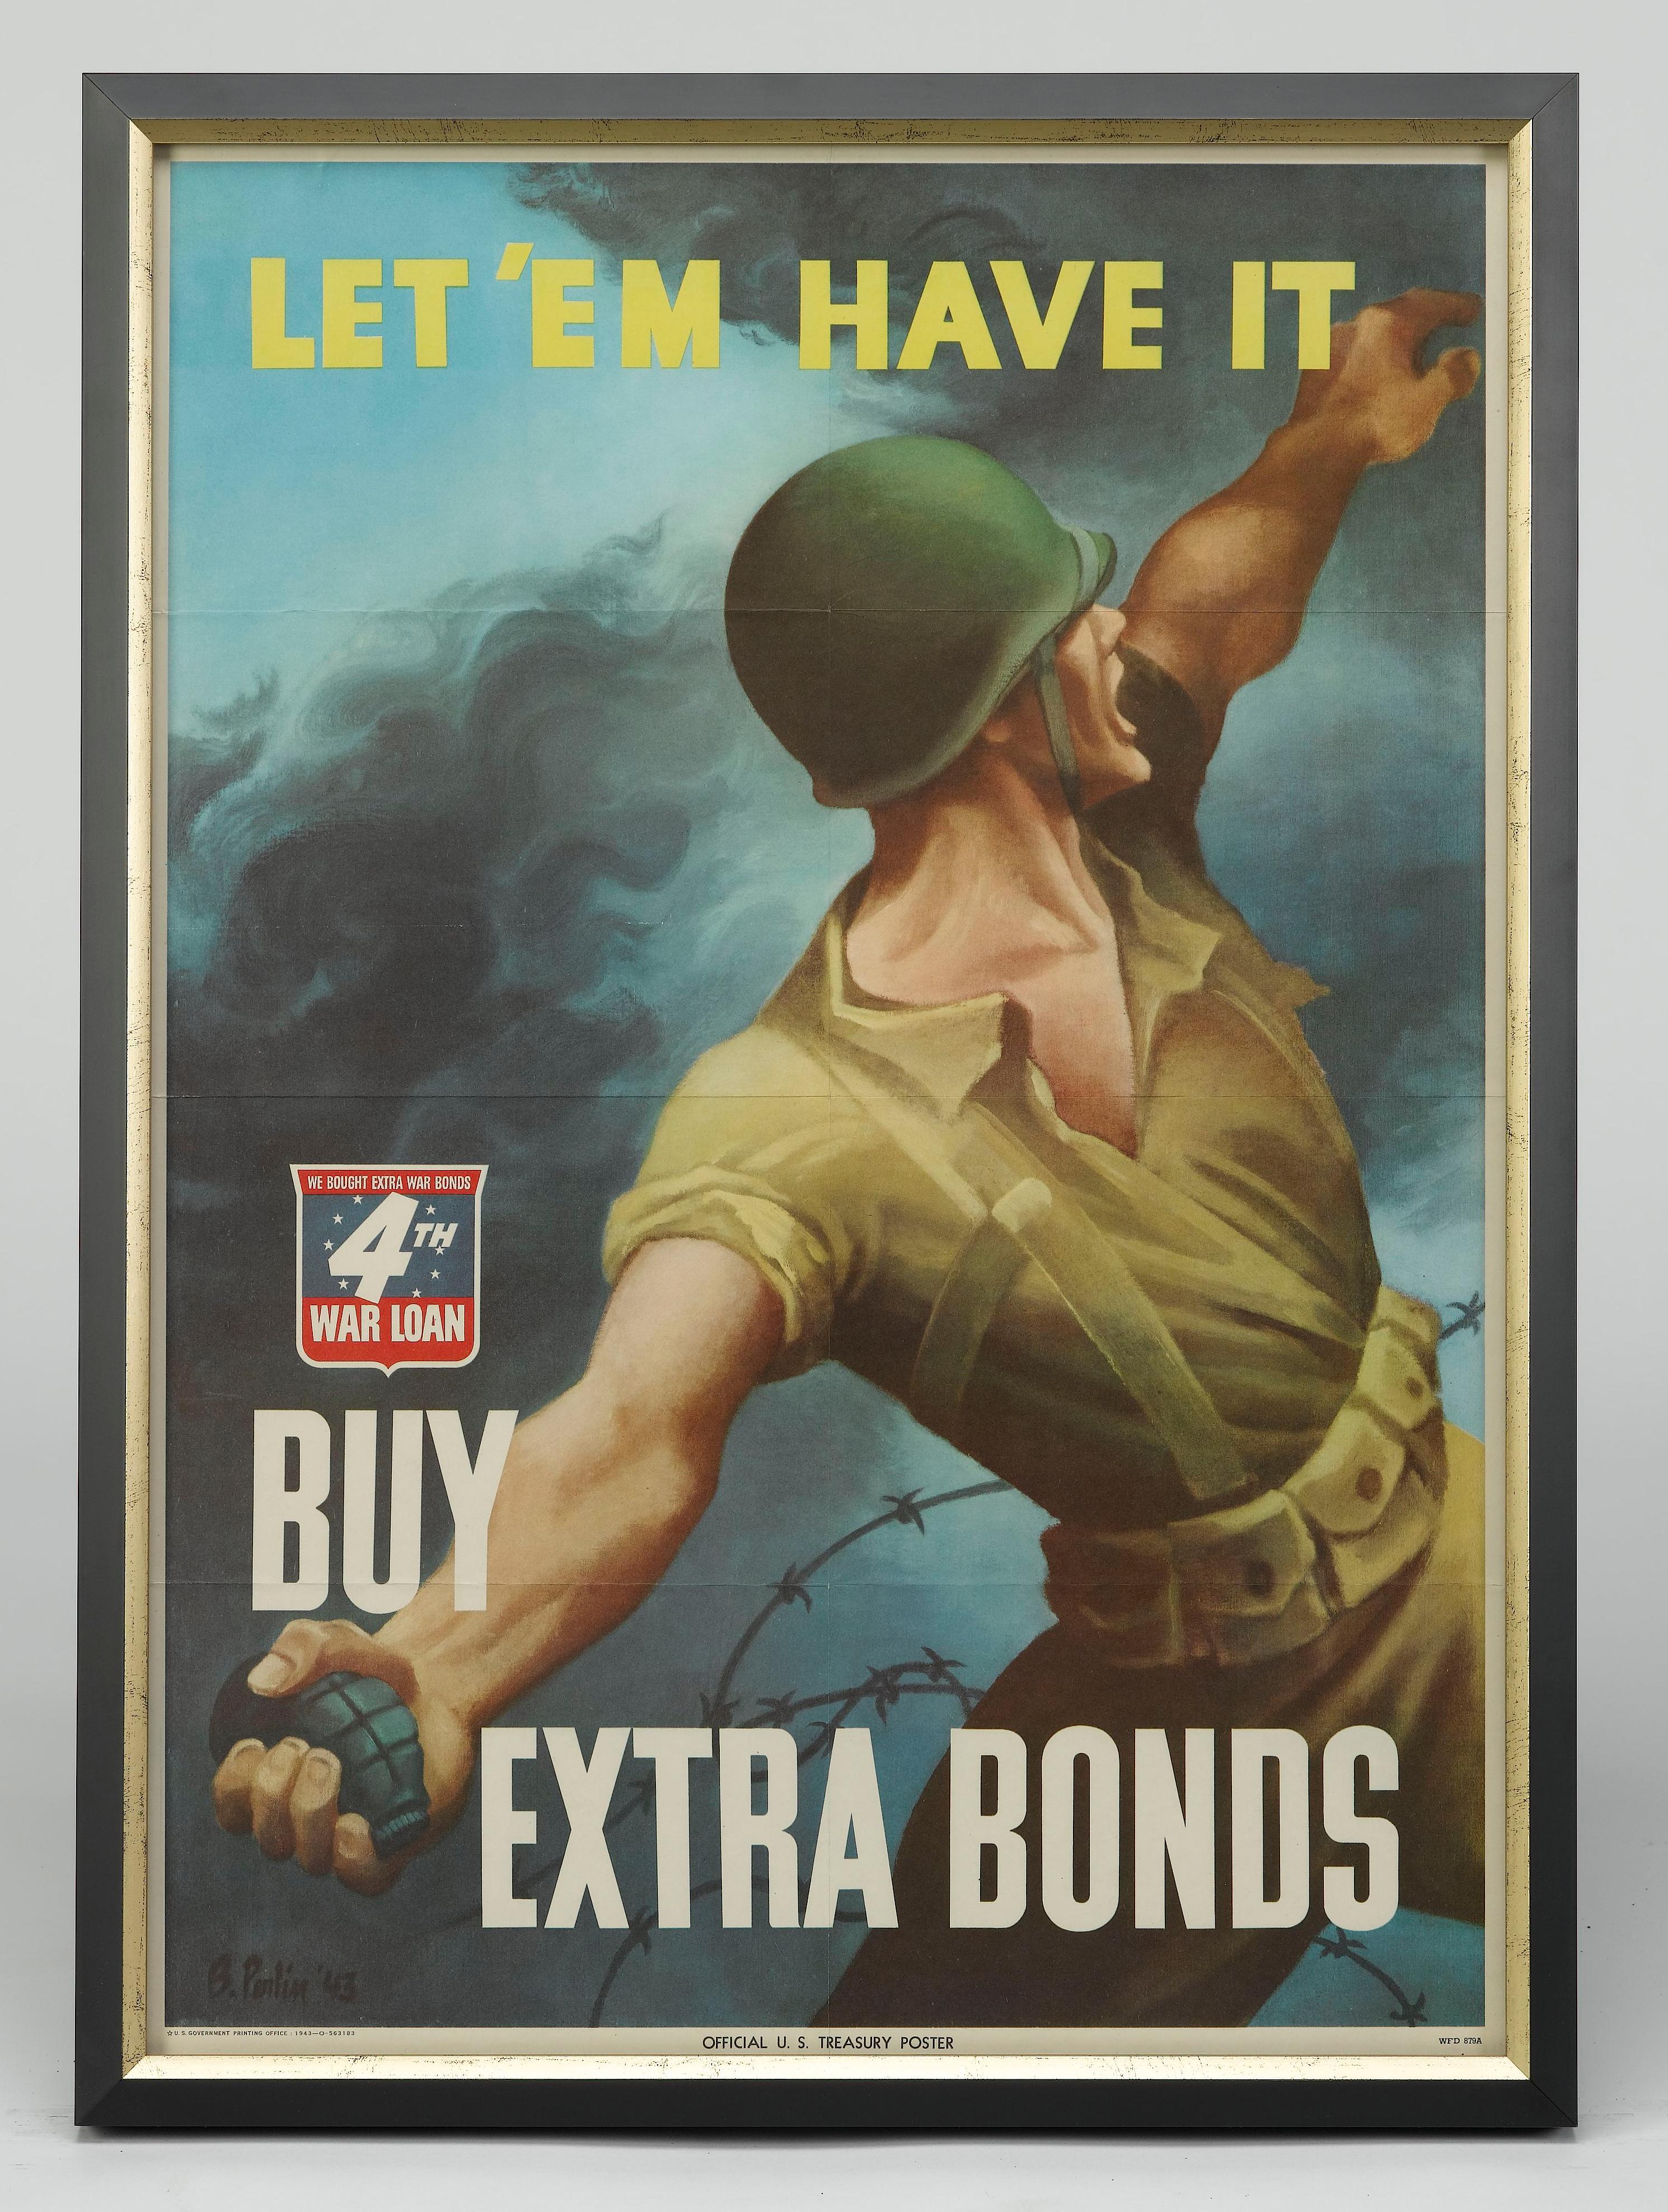 This is an original World War II poster, dating to 1943. The poster reads 